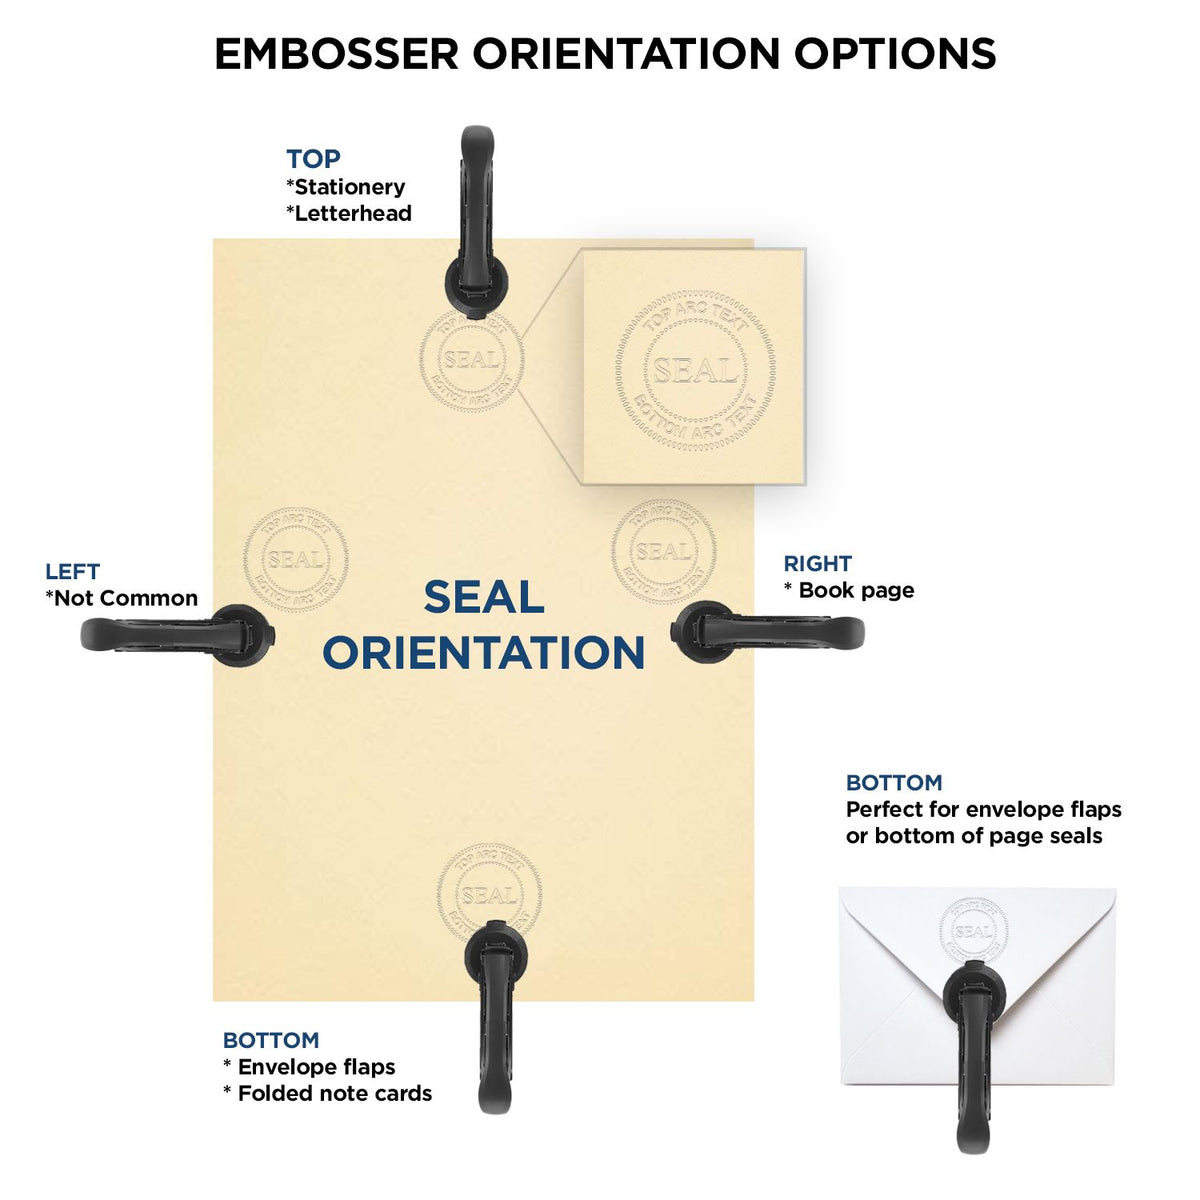 An infographic for the Handheld Nebraska Land Surveyor Seal showing embosser orientation, this is showing examples of a top, bottom, right and left insert.